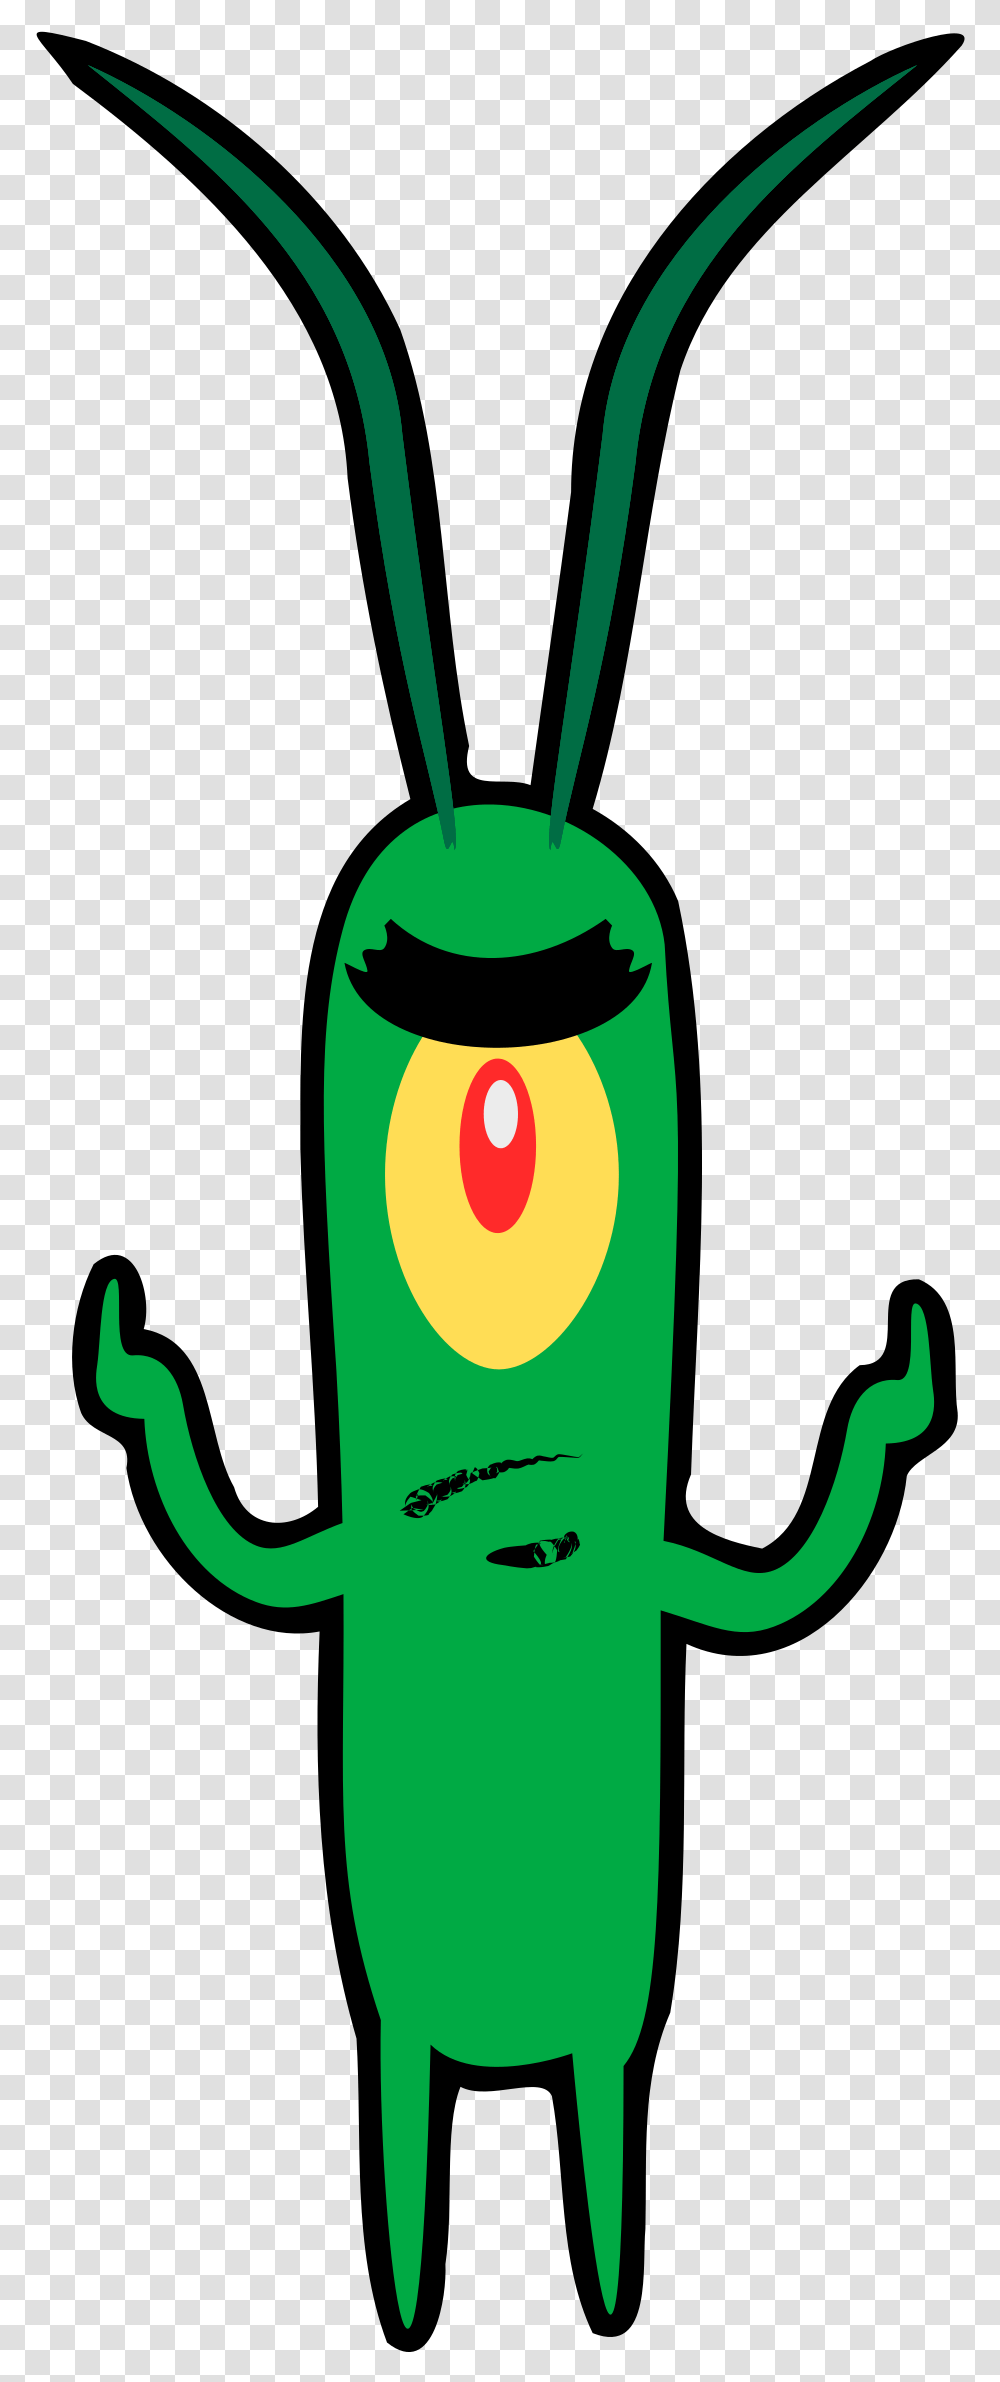 Download Plankton Image With No Phytoplankton Cartoon, Plant, Food, Vegetable, Relish Transparent Png